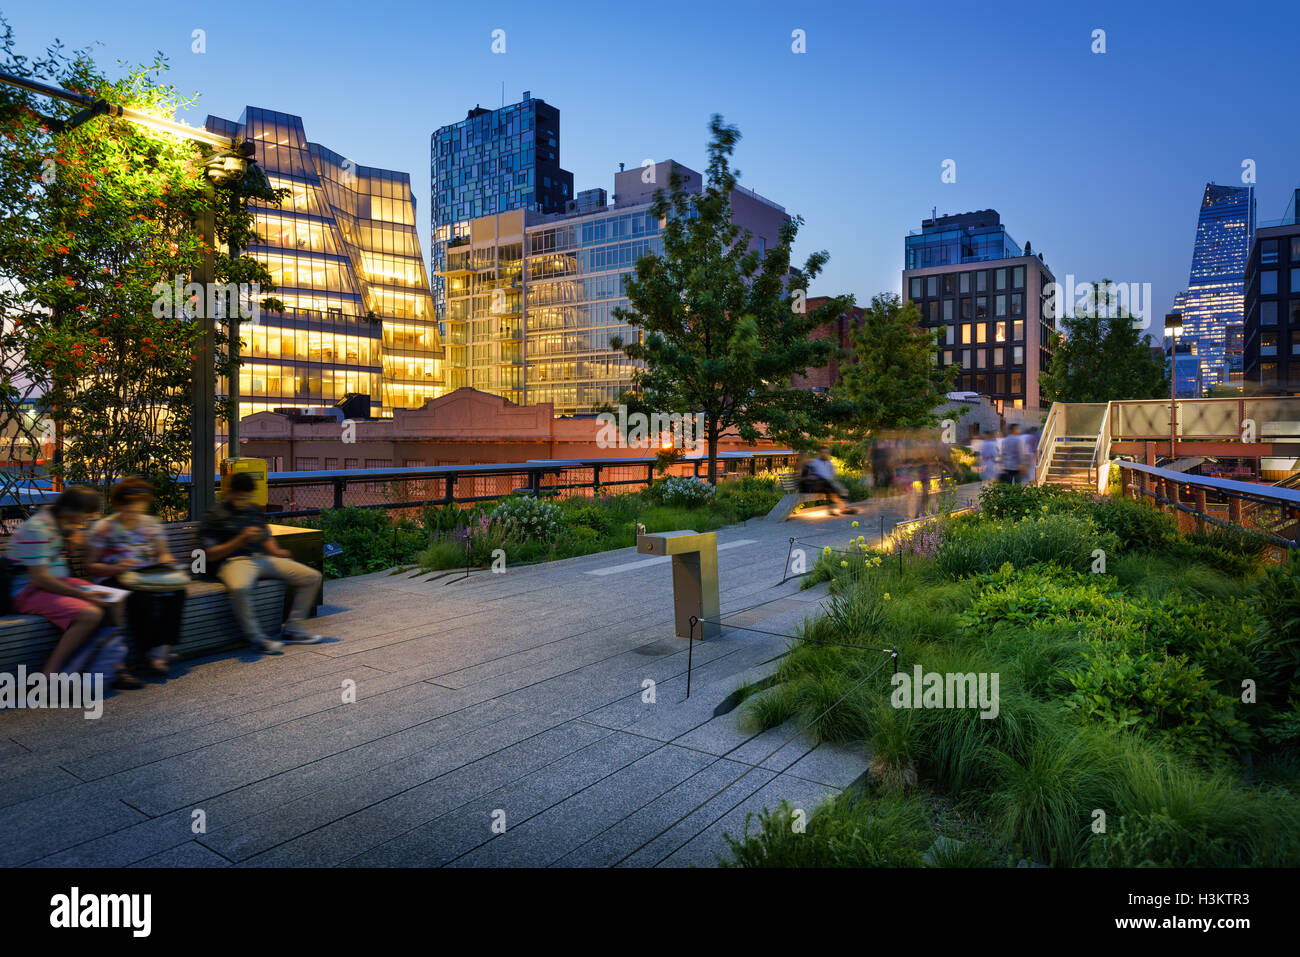 Twilight on the Highline (High Line Park) promenade in Chelsea with city lights. Manhattan, New York City Stock Photo